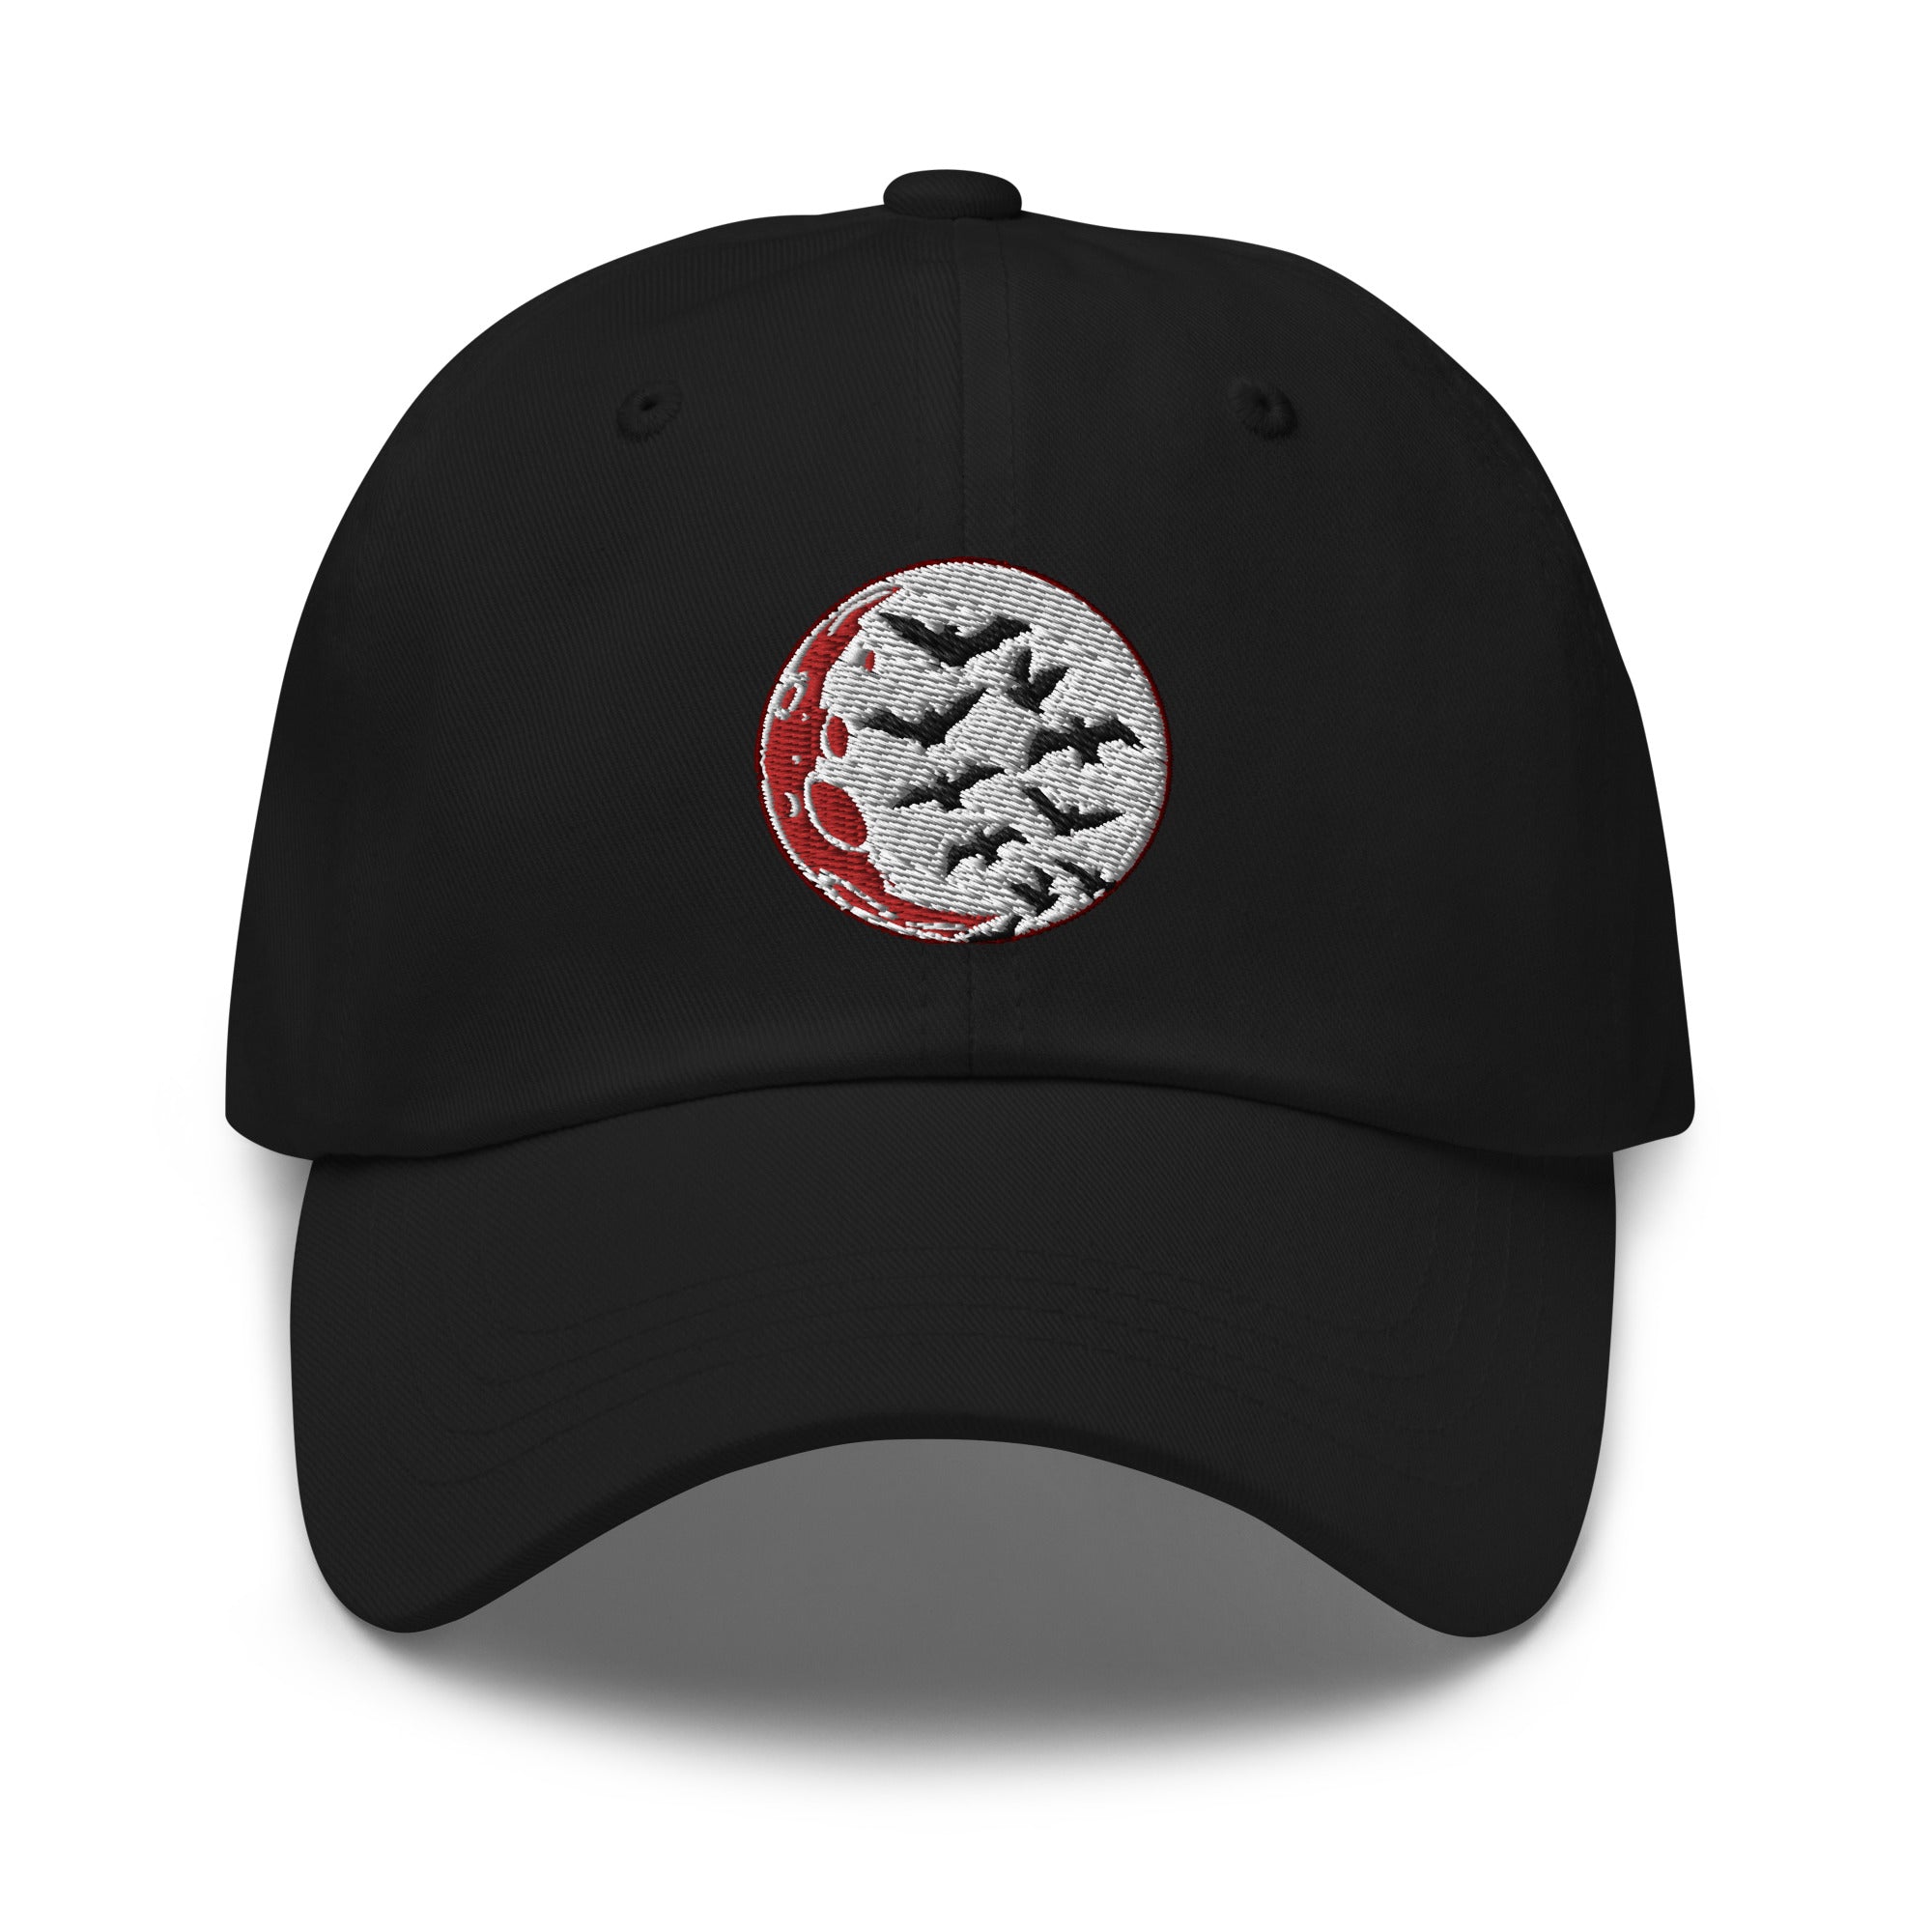 Flying Bats over Blood Moon Embroidered Baseball Cap Dad hat - Edge of Life Designs